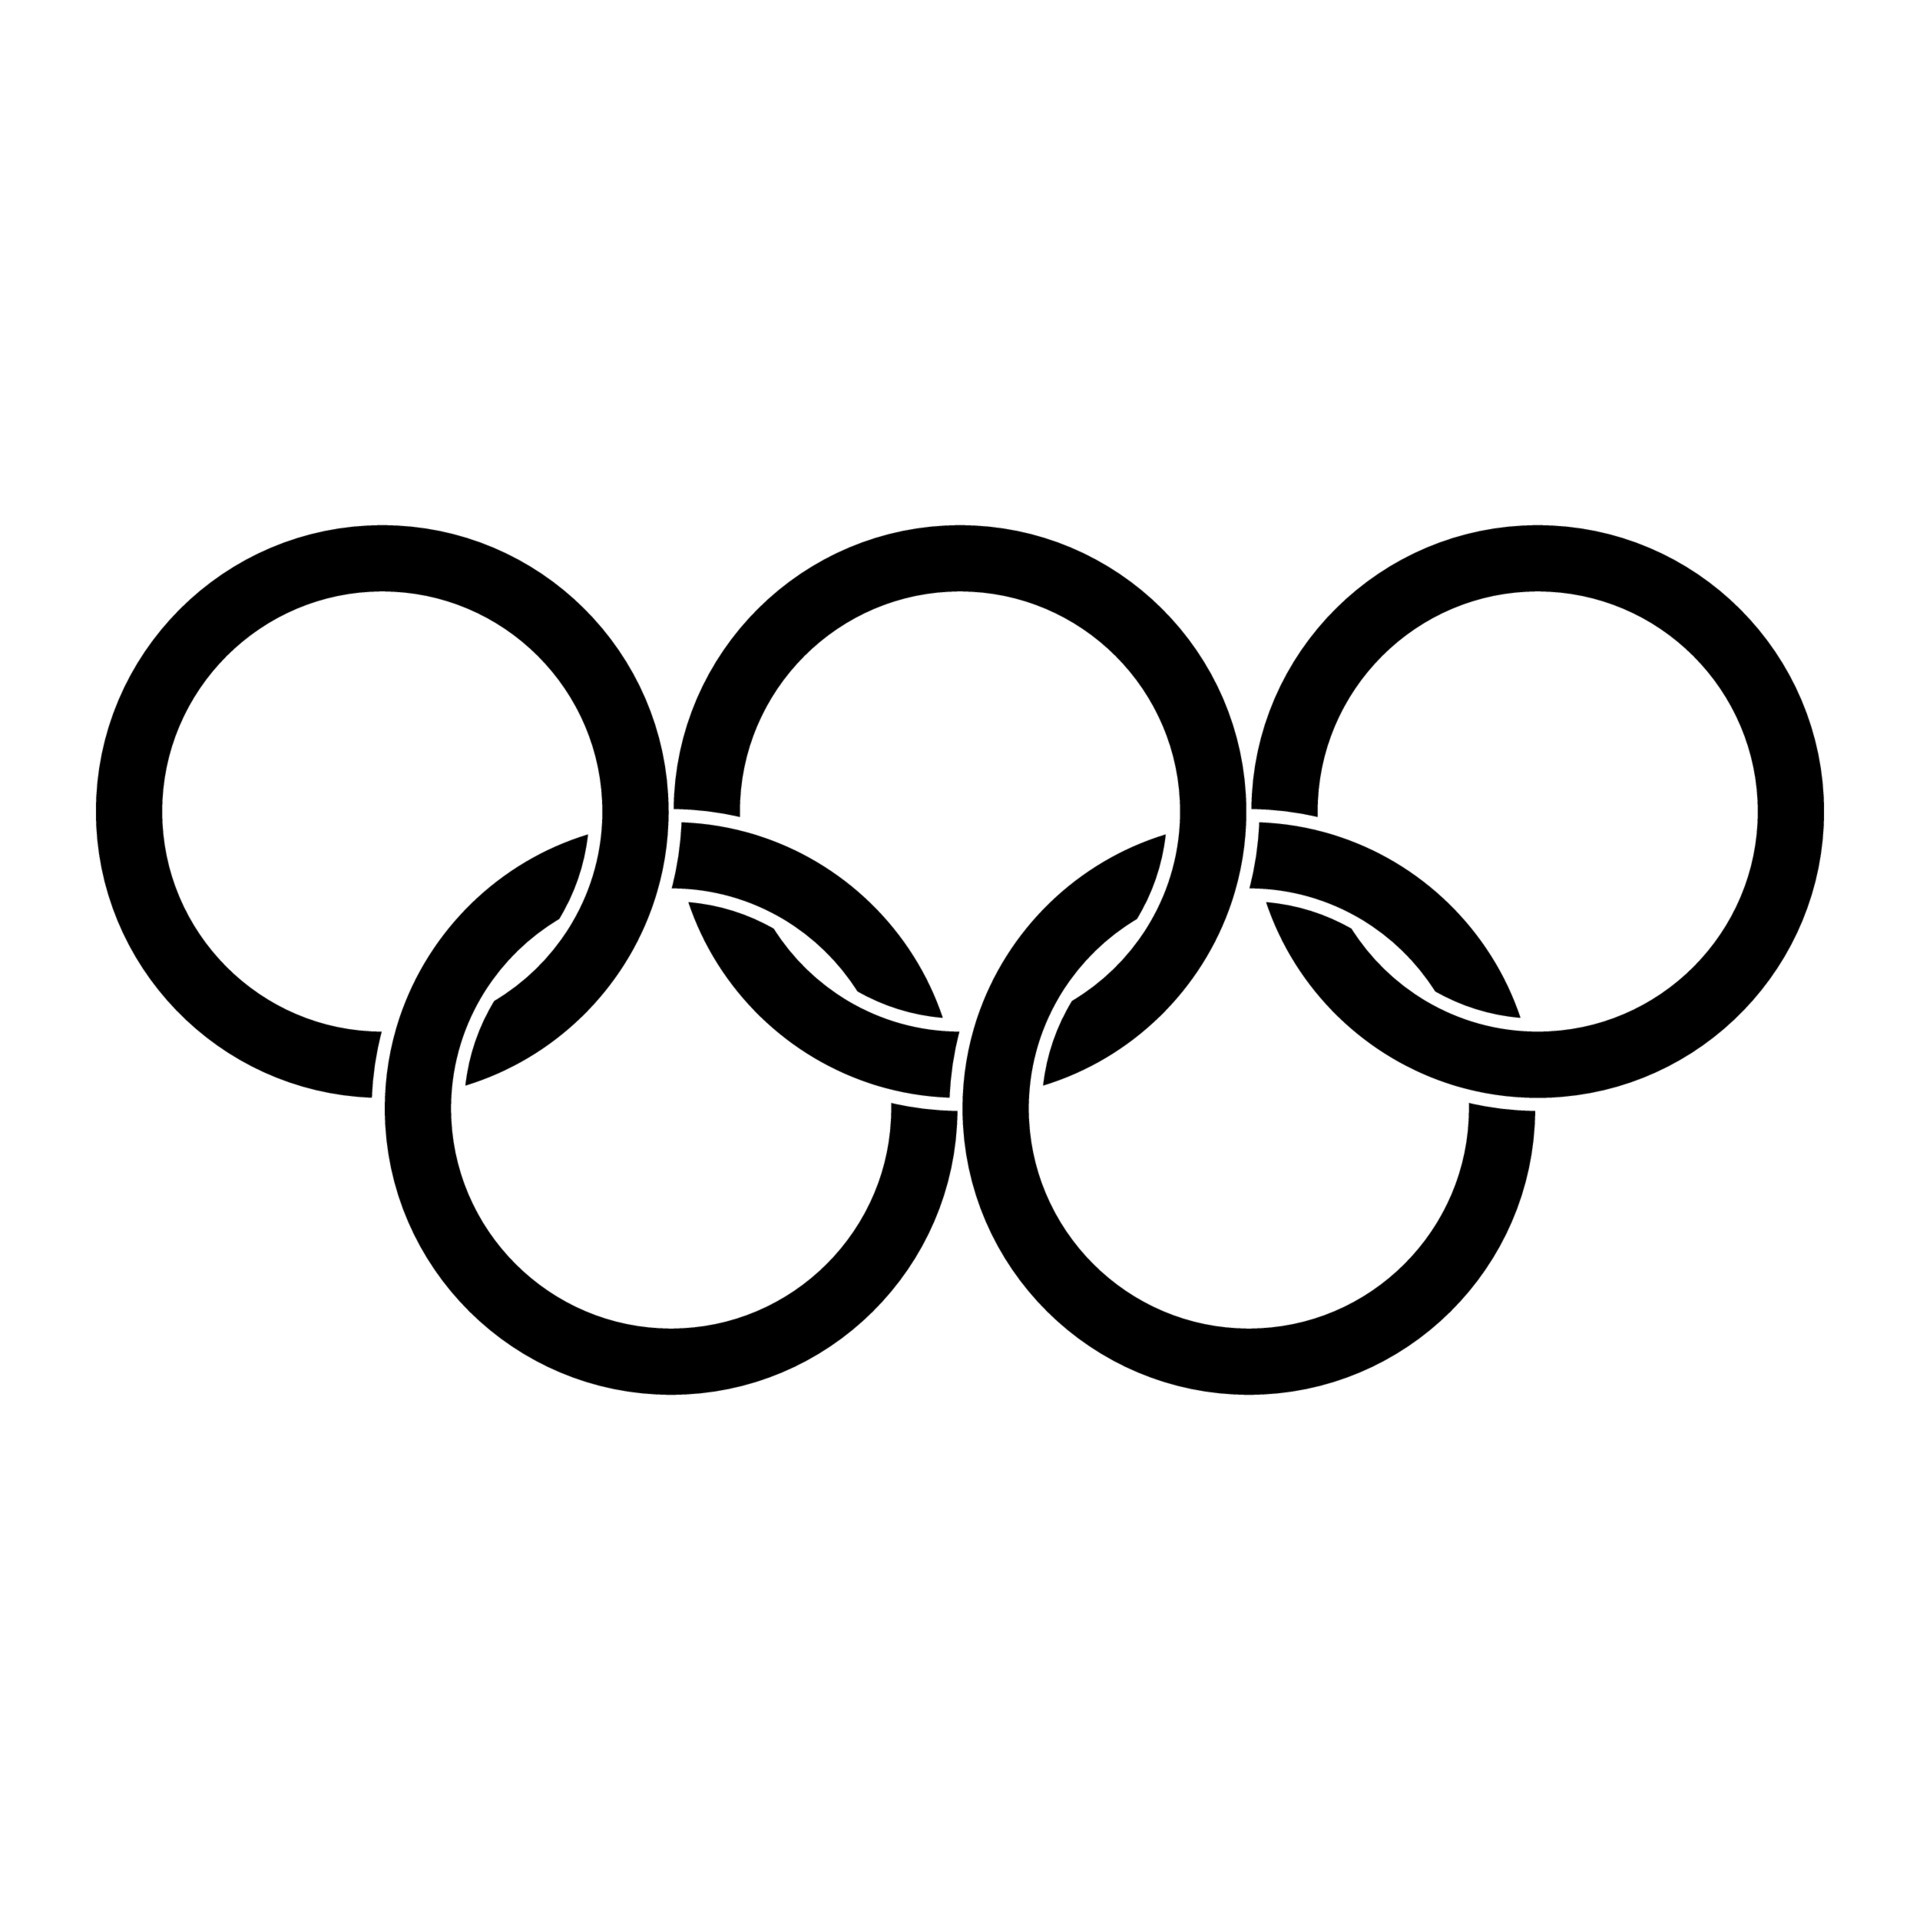 Download 5 Olympic Rings Nomer 27